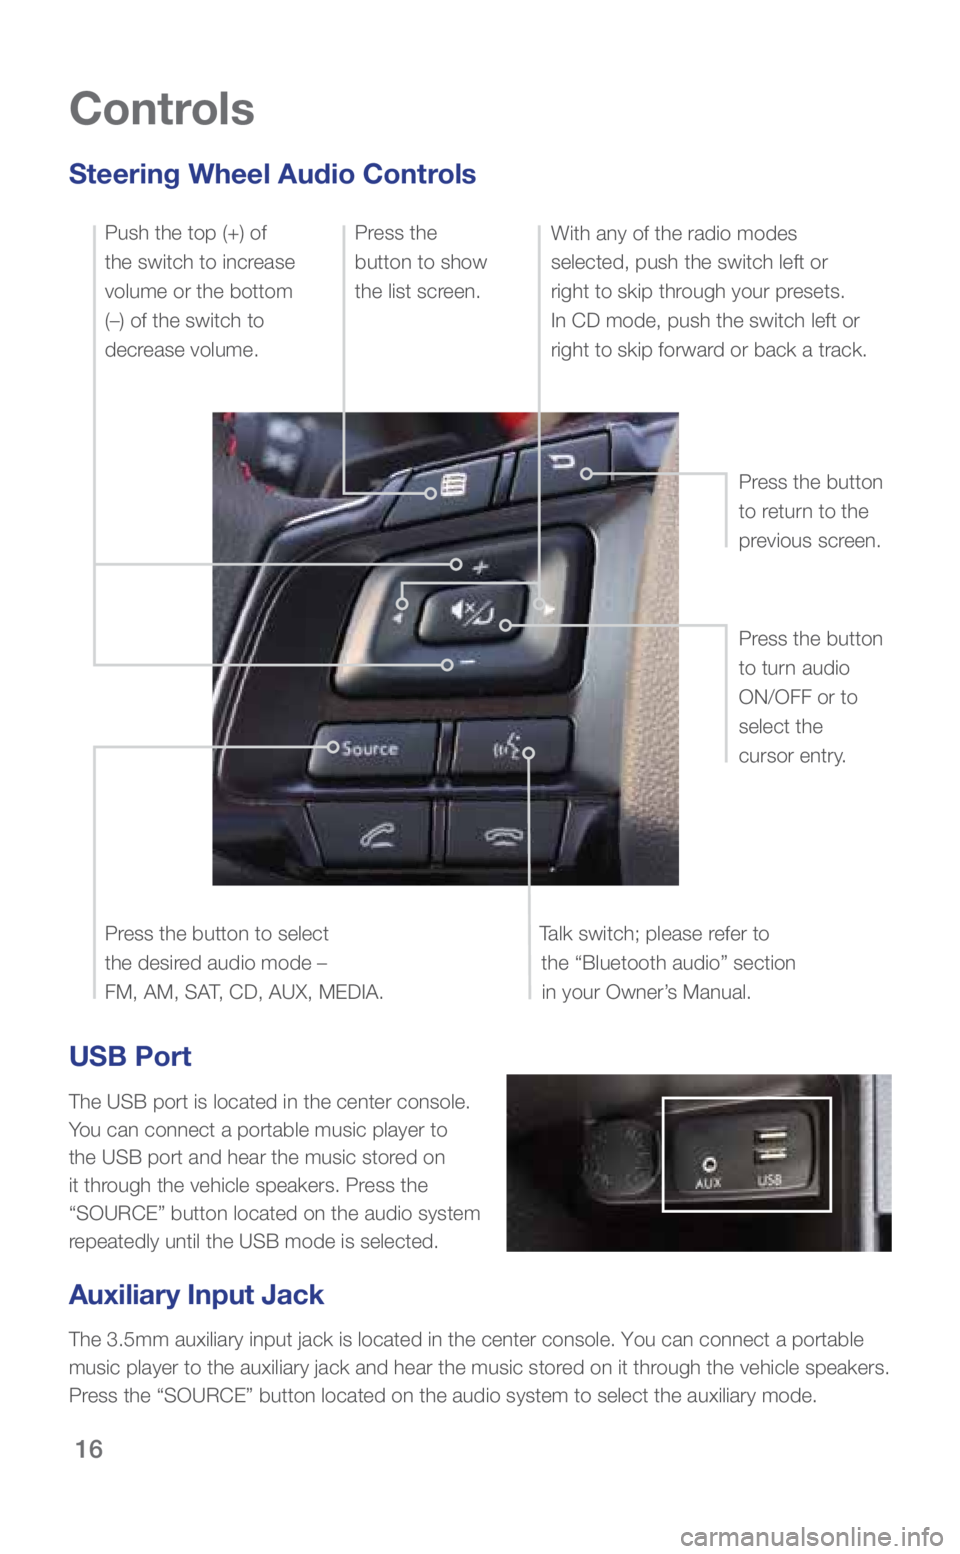 SUBARU WRX 2018  Quick Guide 16
USB Port
The USB port is located in the center console. 
You can connect a portable music player to 
the USB port and hear the music stored on 
it through the vehicle speakers. Press the 
“SOURCE